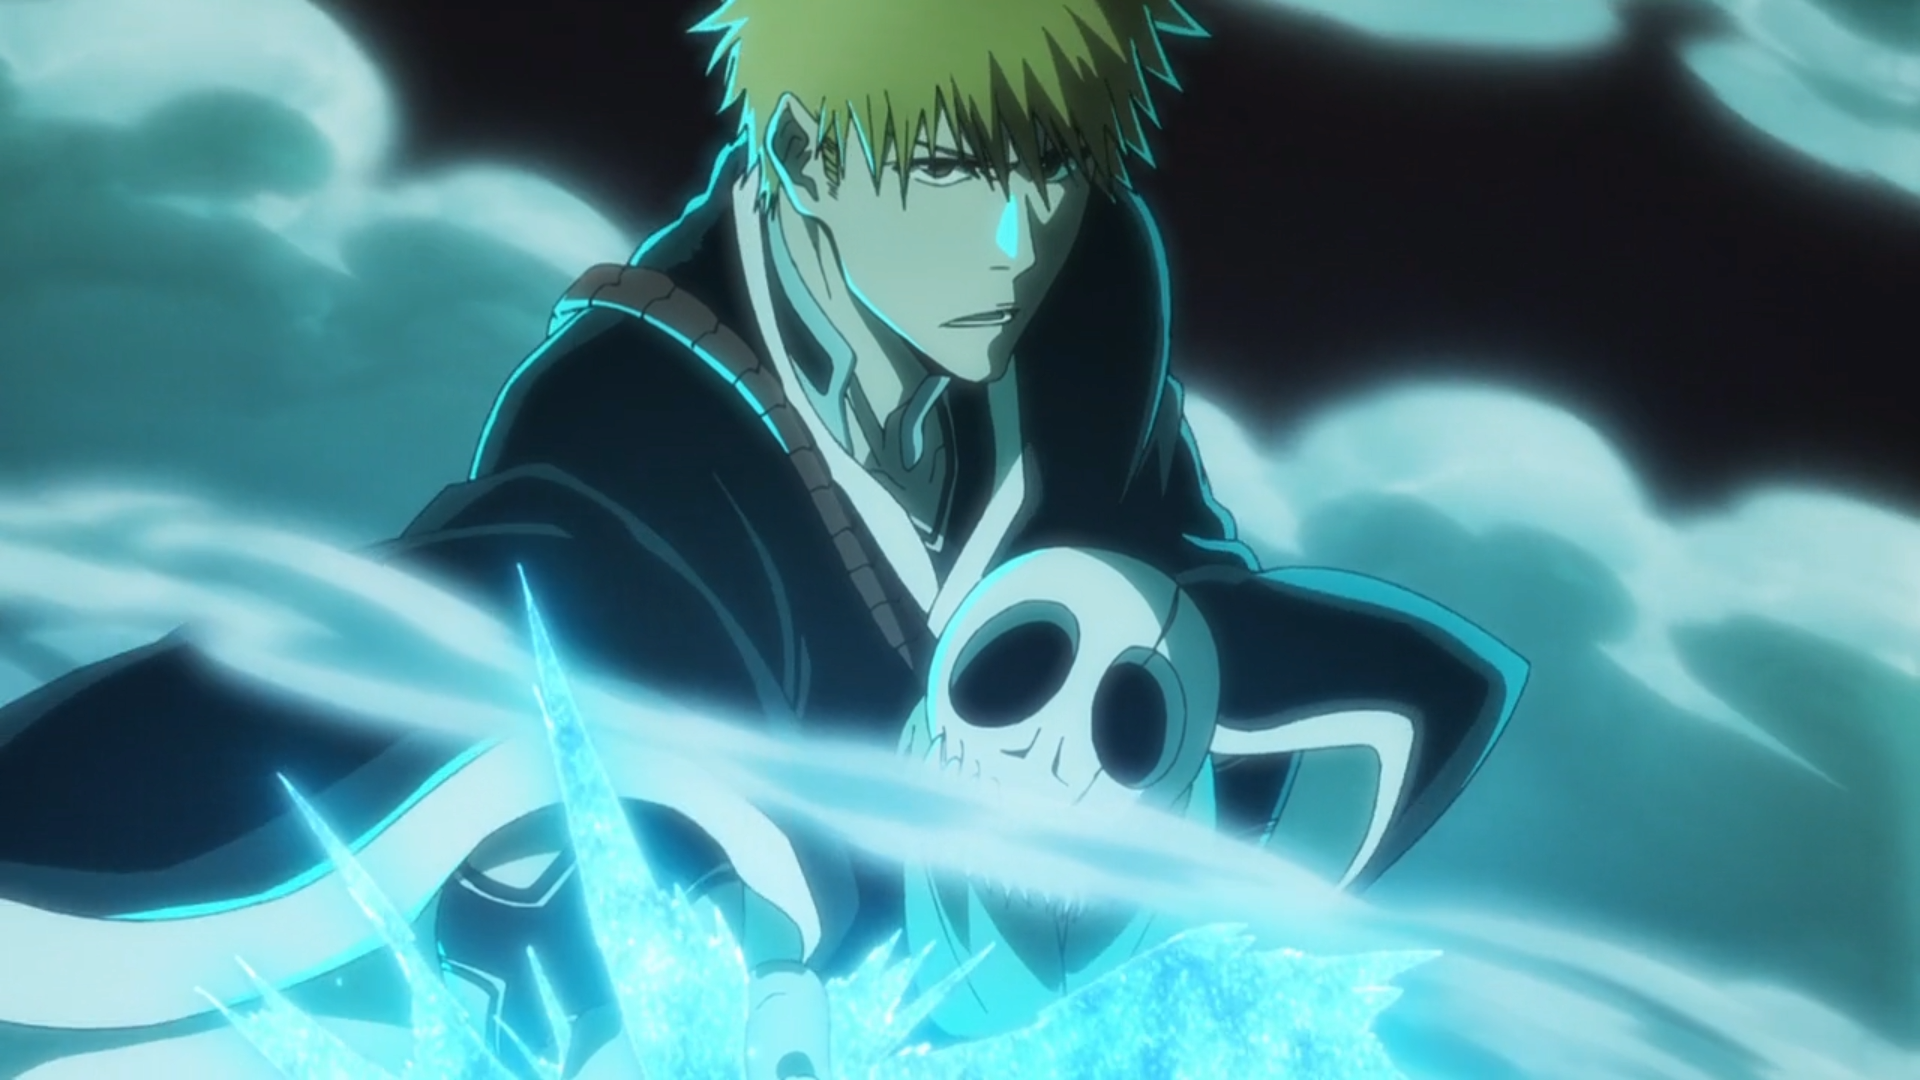 Ichigo, holding Nel, catches a blast of energy while facing the viewer